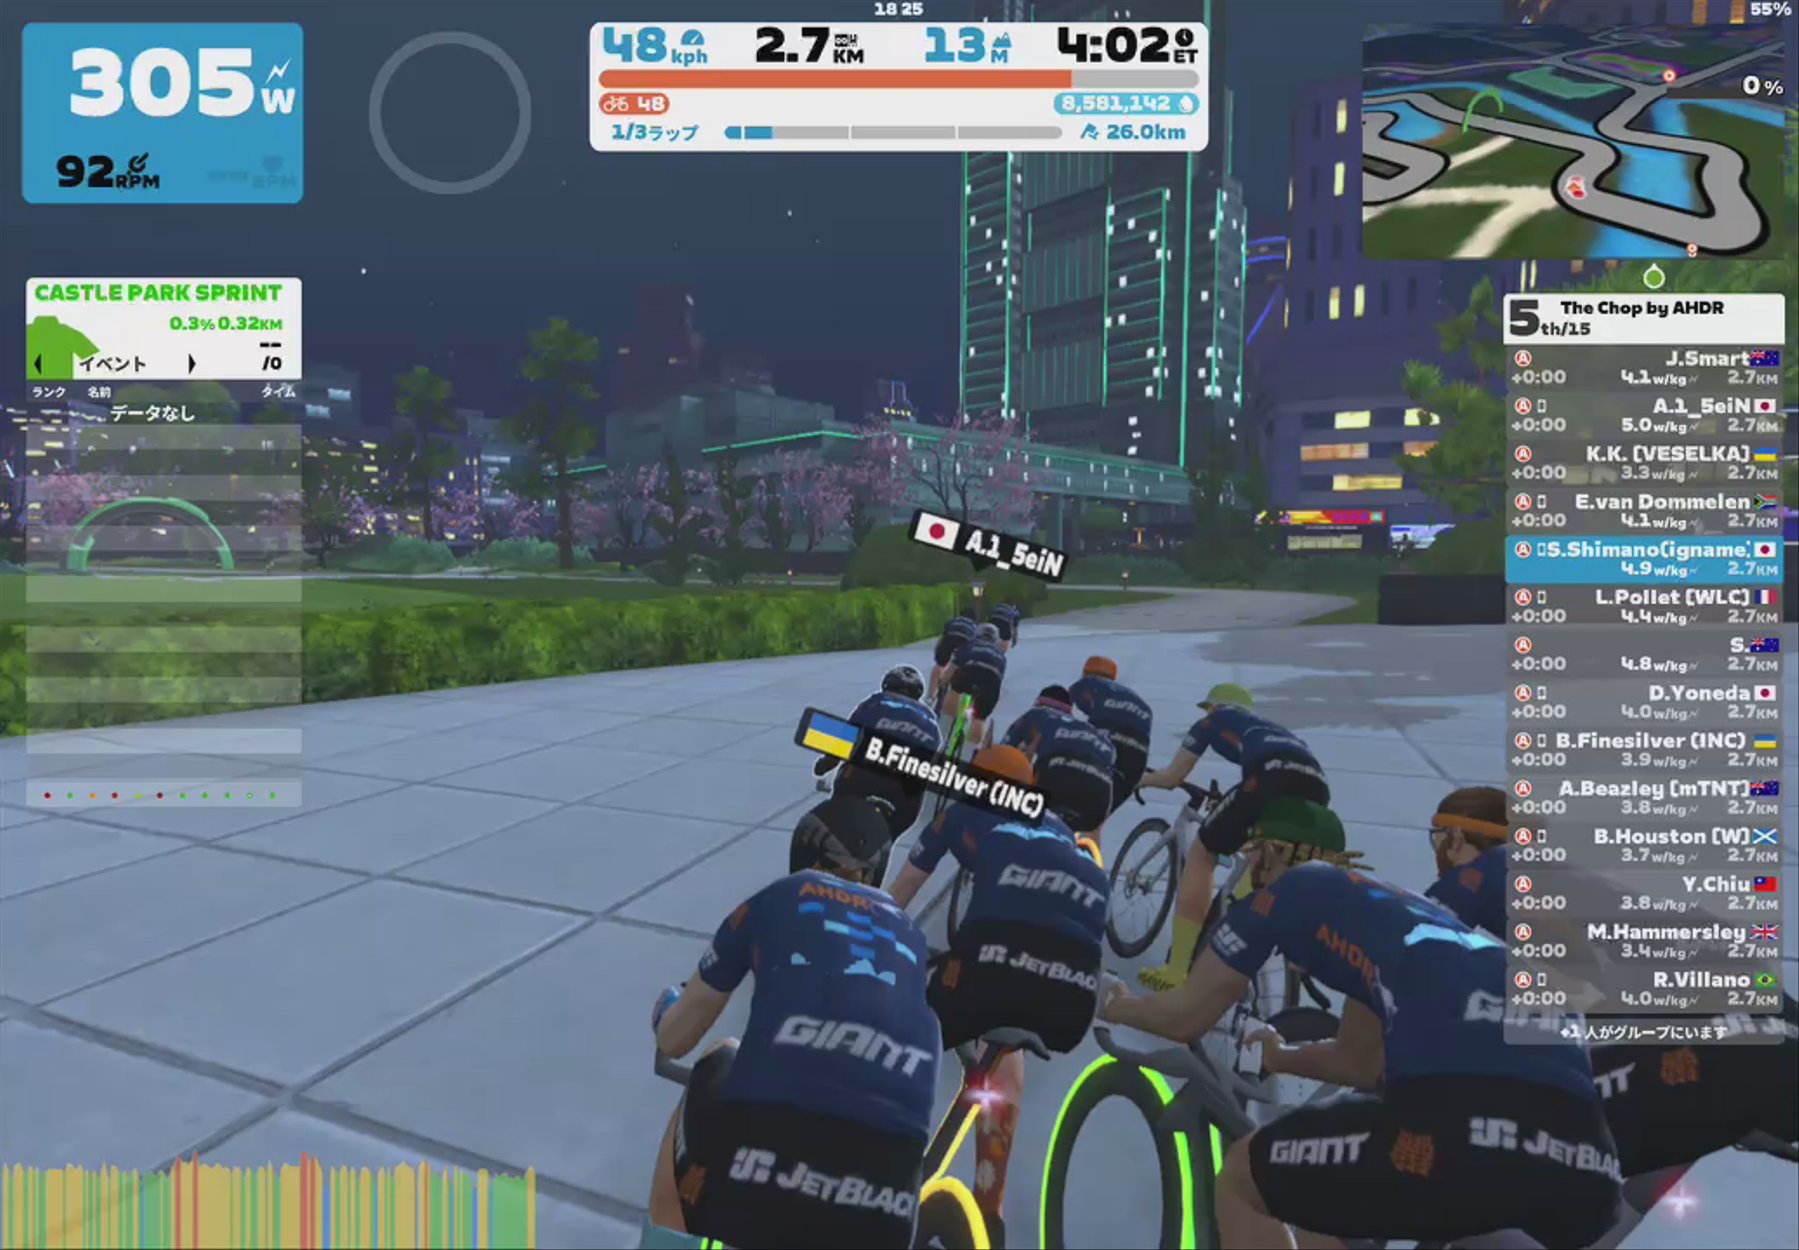 Zwift - Race: The Chop by AHDR (A) on Sleepless City in Makuri Islands